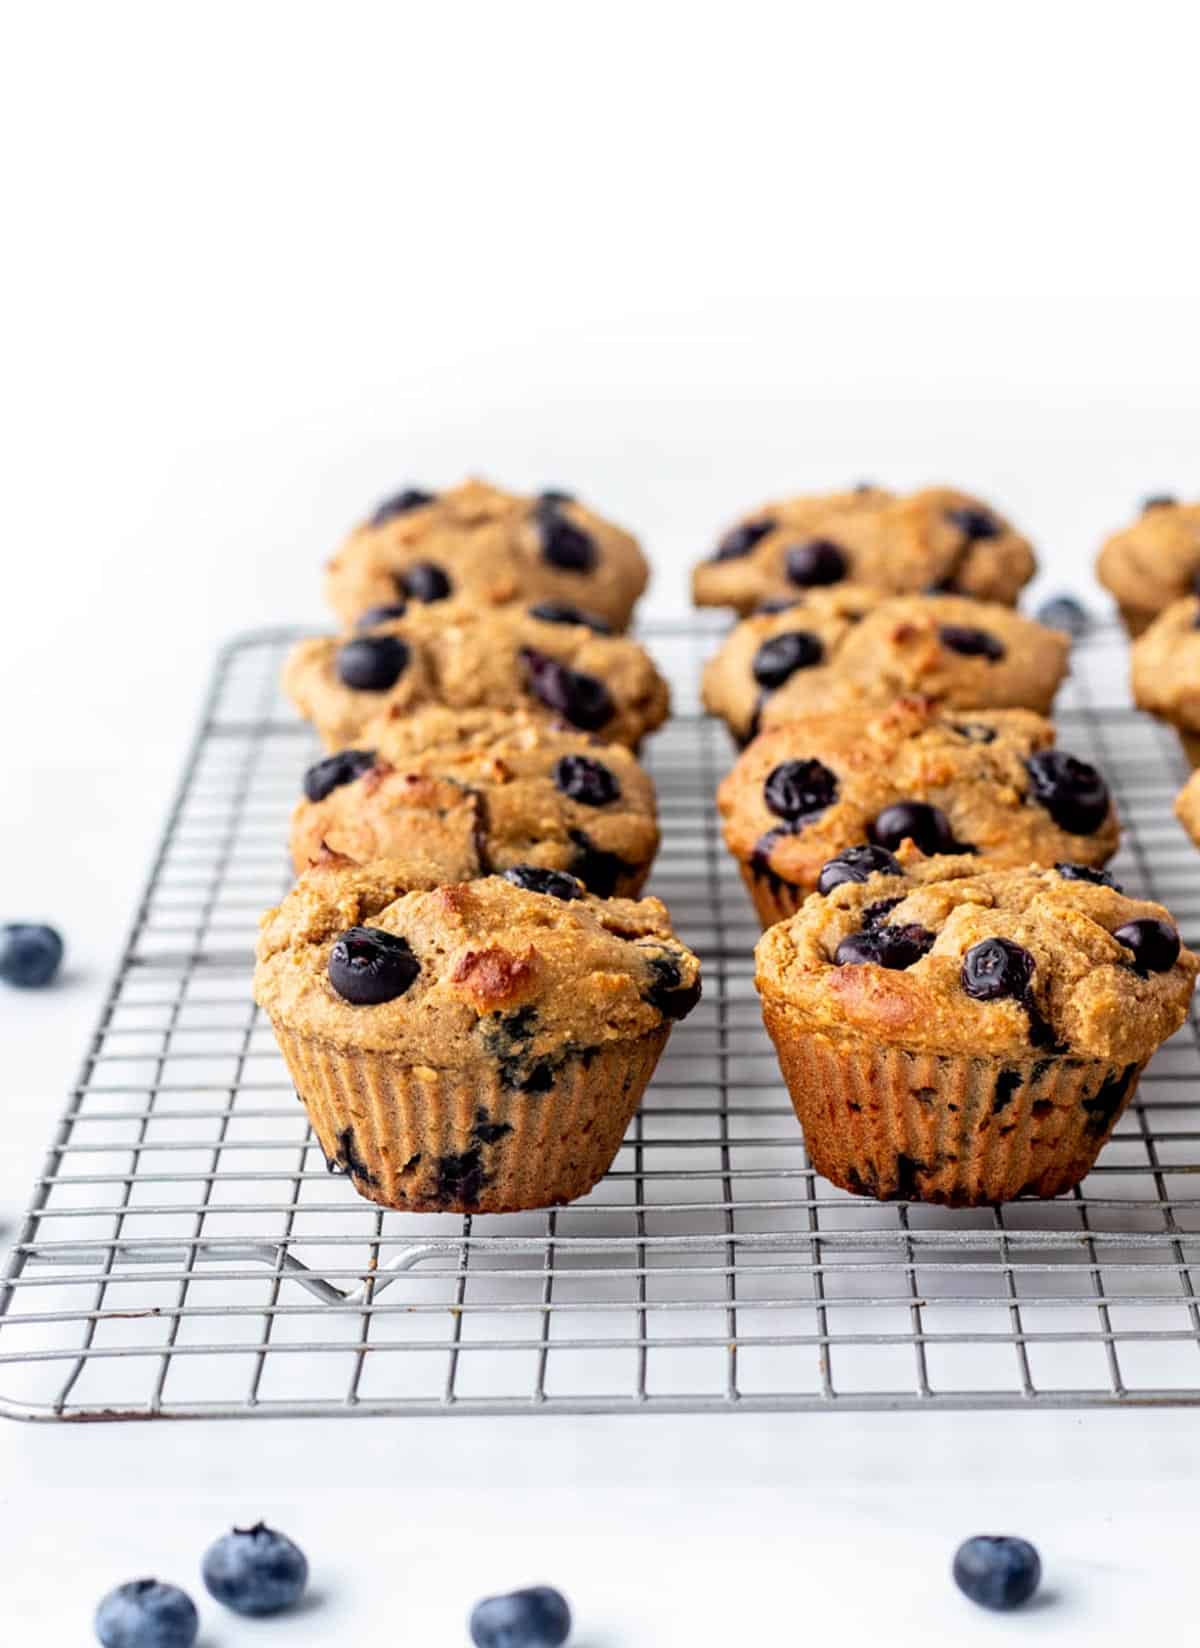 Blueberry protein muffins lined up on a cooling wire rack.